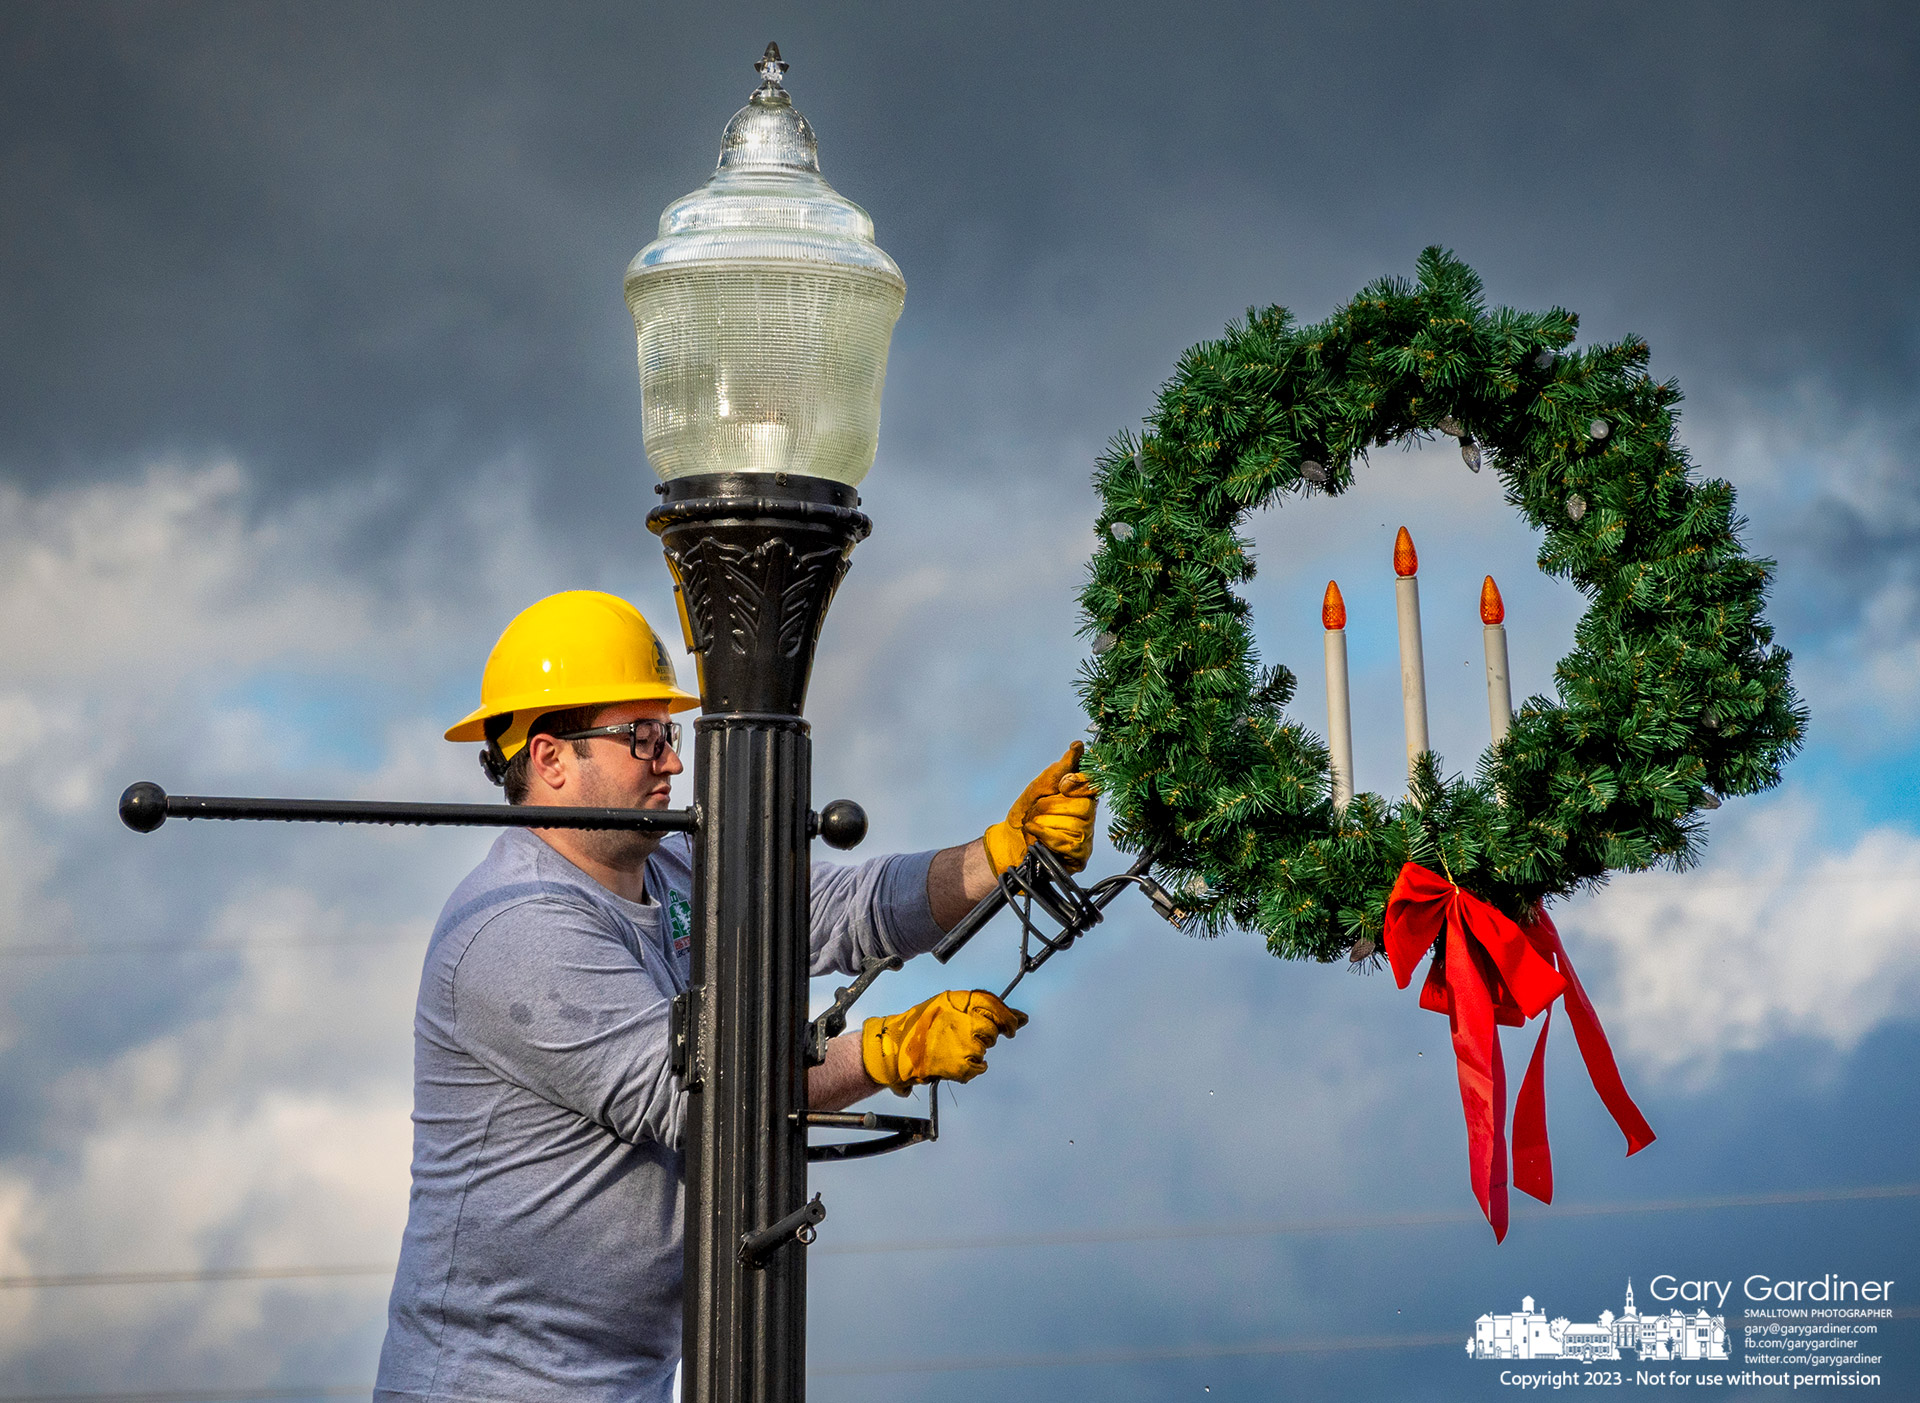 A city worker removes a Christmas wreath attached to a light pole near the library as the year-end holiday celebration comes to an end with the removal of the lights. My Final Photo for January 4, 2023.